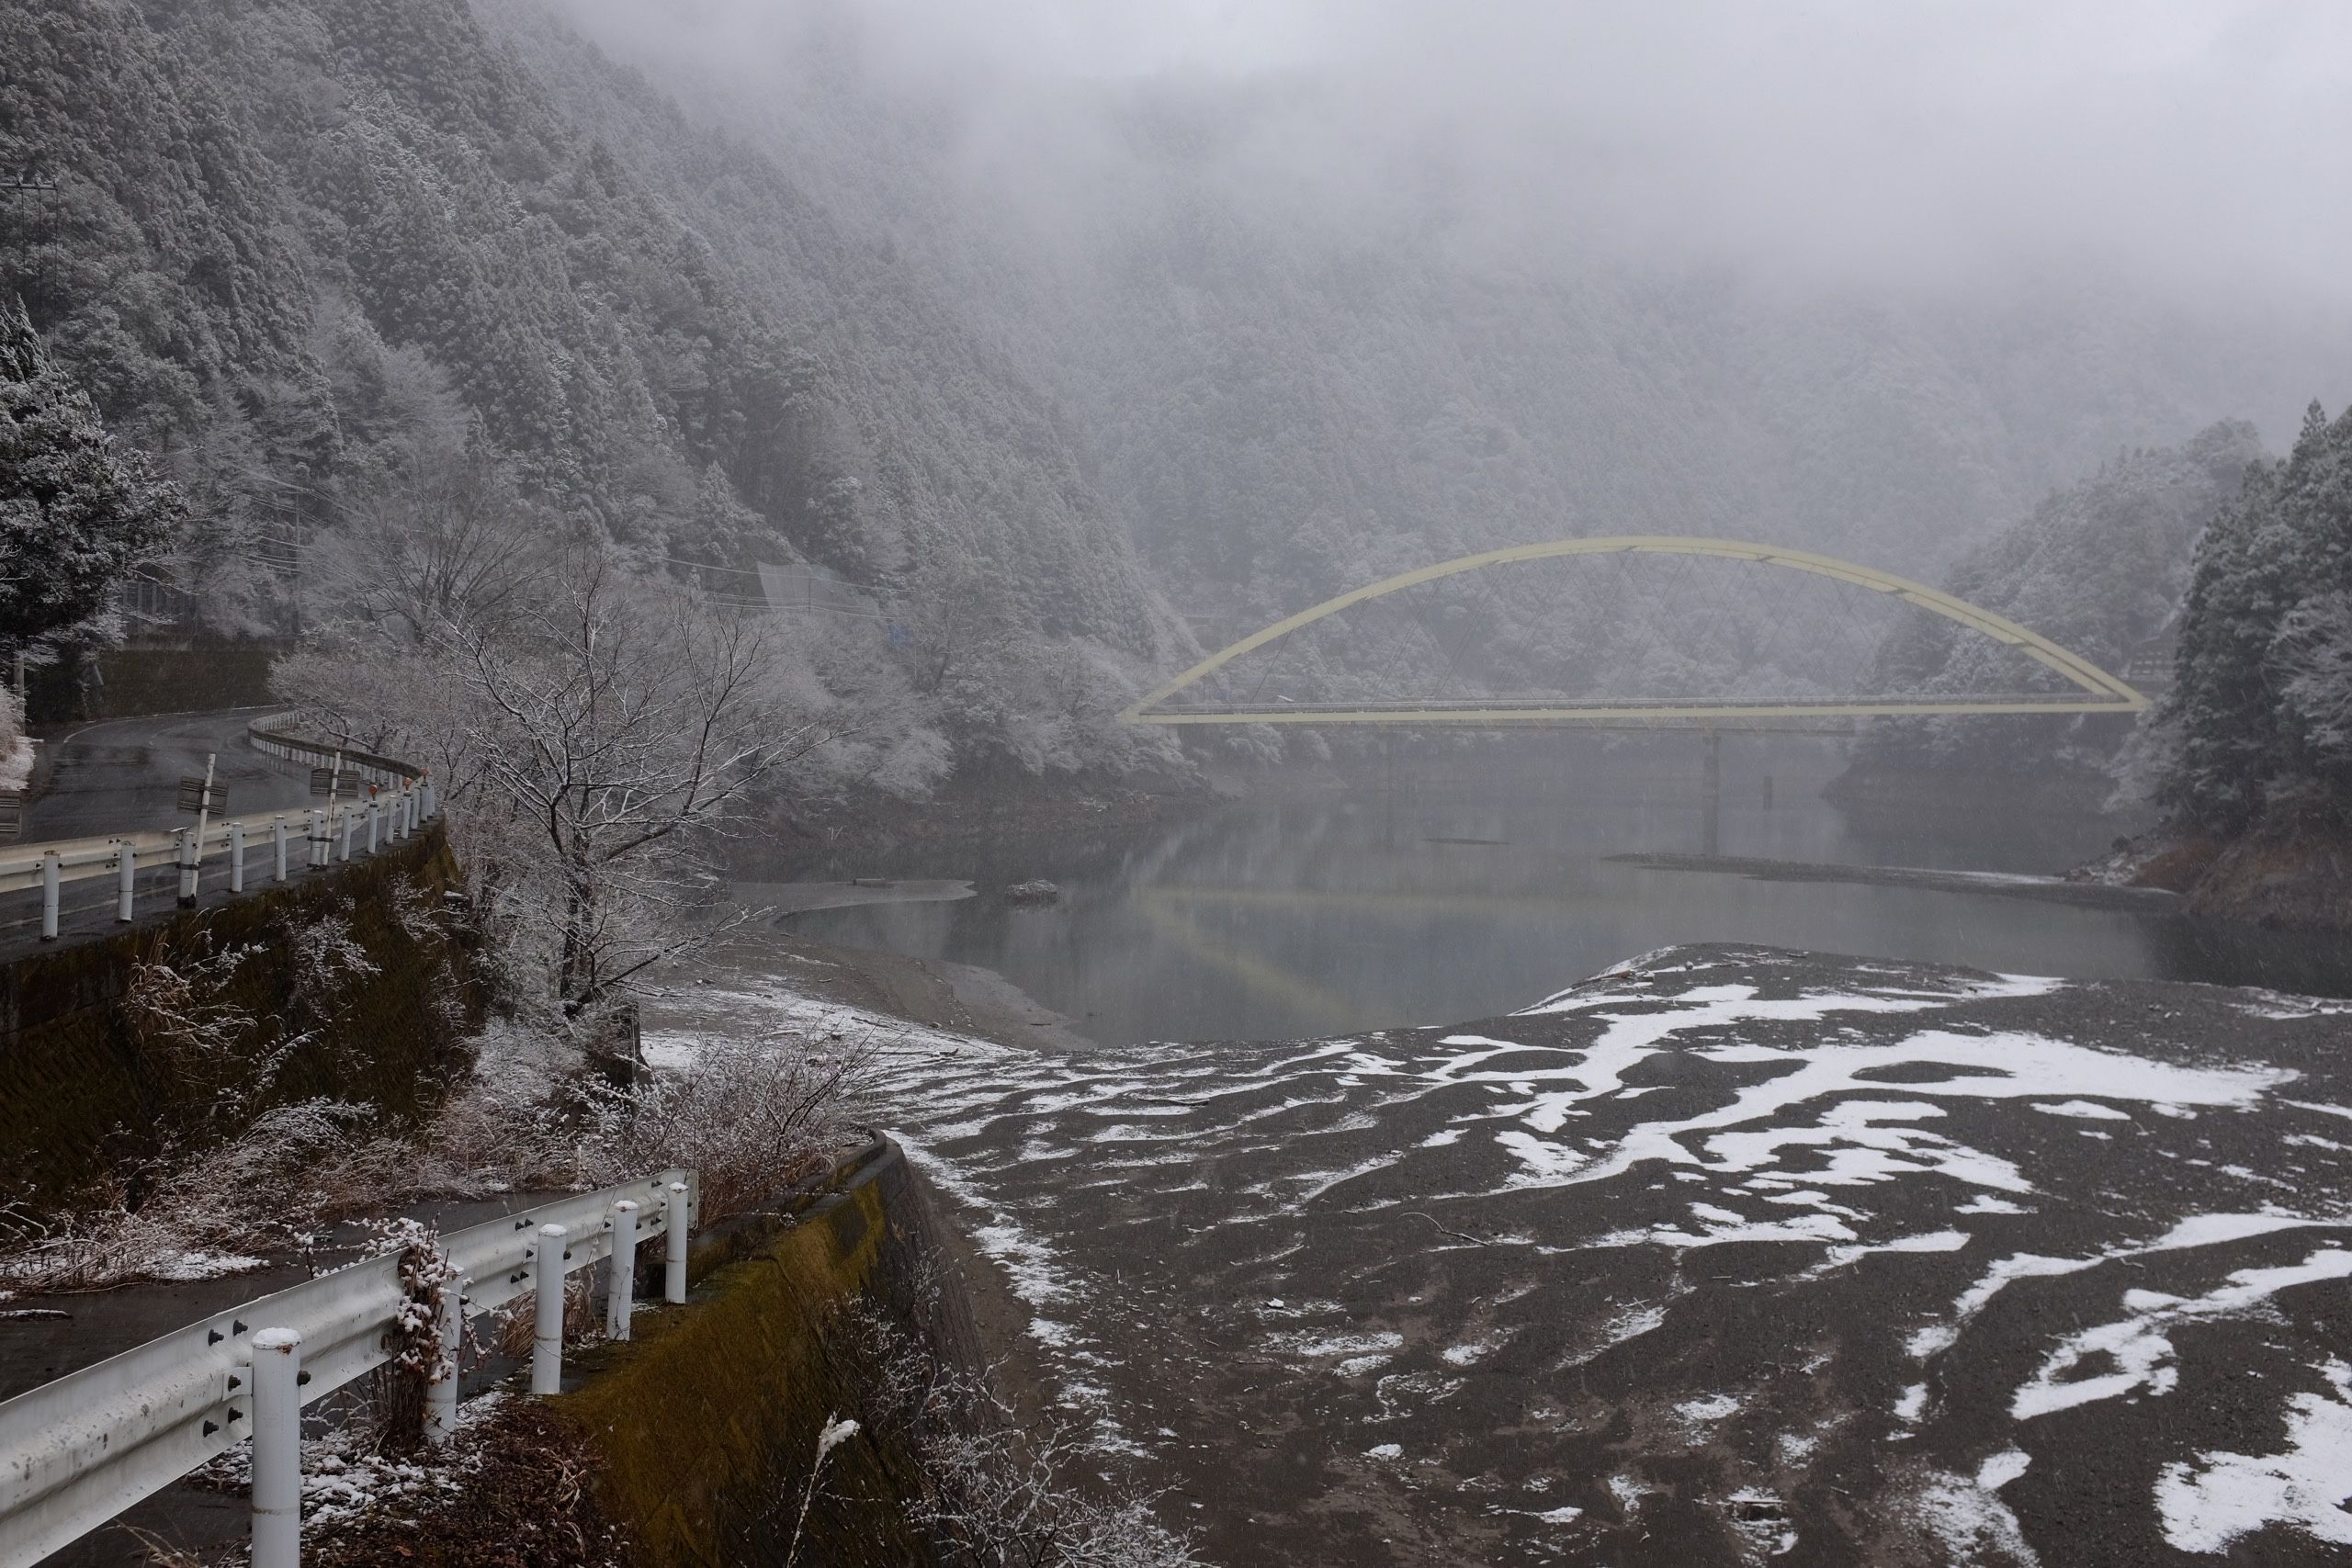 A yellow bridge straddles a river in a steep valley where the trees are all covered in fresh snow.